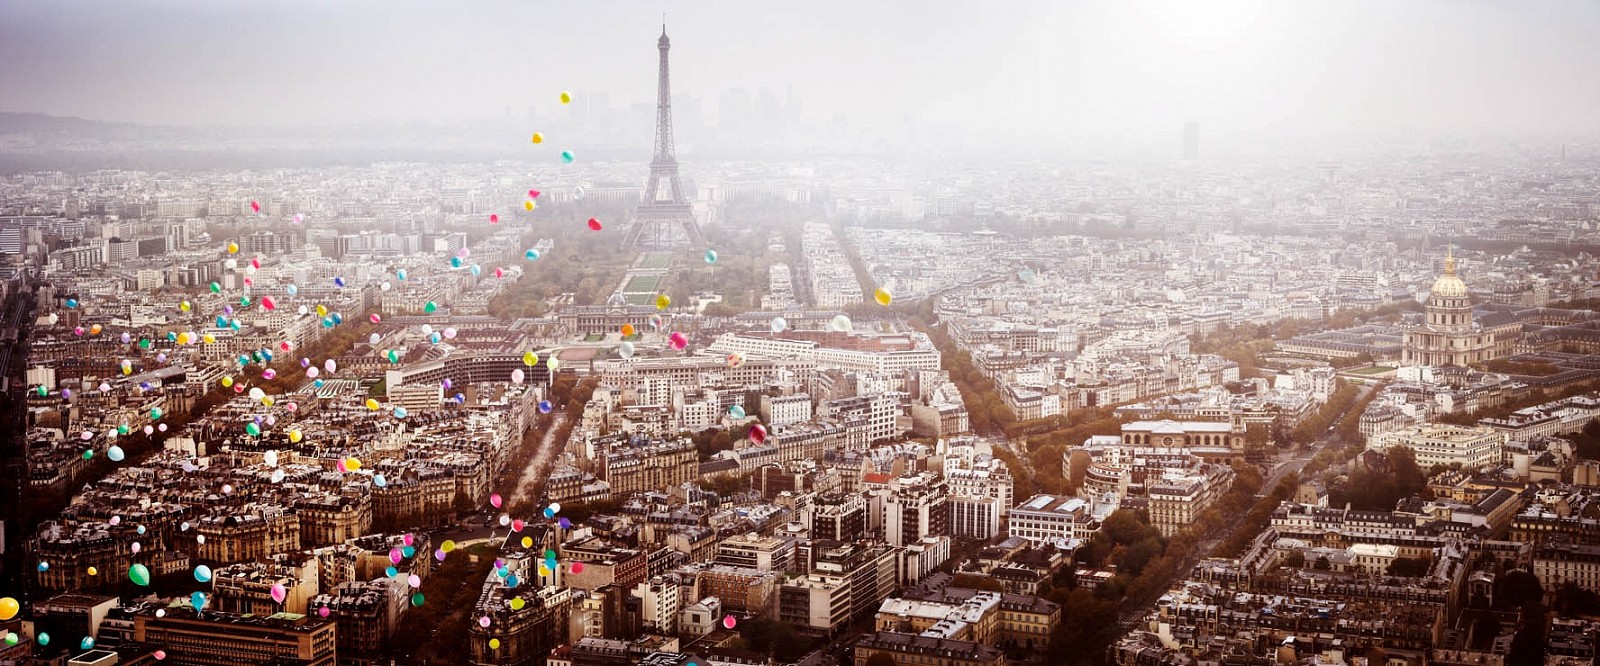 David Drebin, Balloons over Paris, 2016
Digital C Print, 30 x 72 inches Also available in 20 x 48 inches and 40 x 96 inches